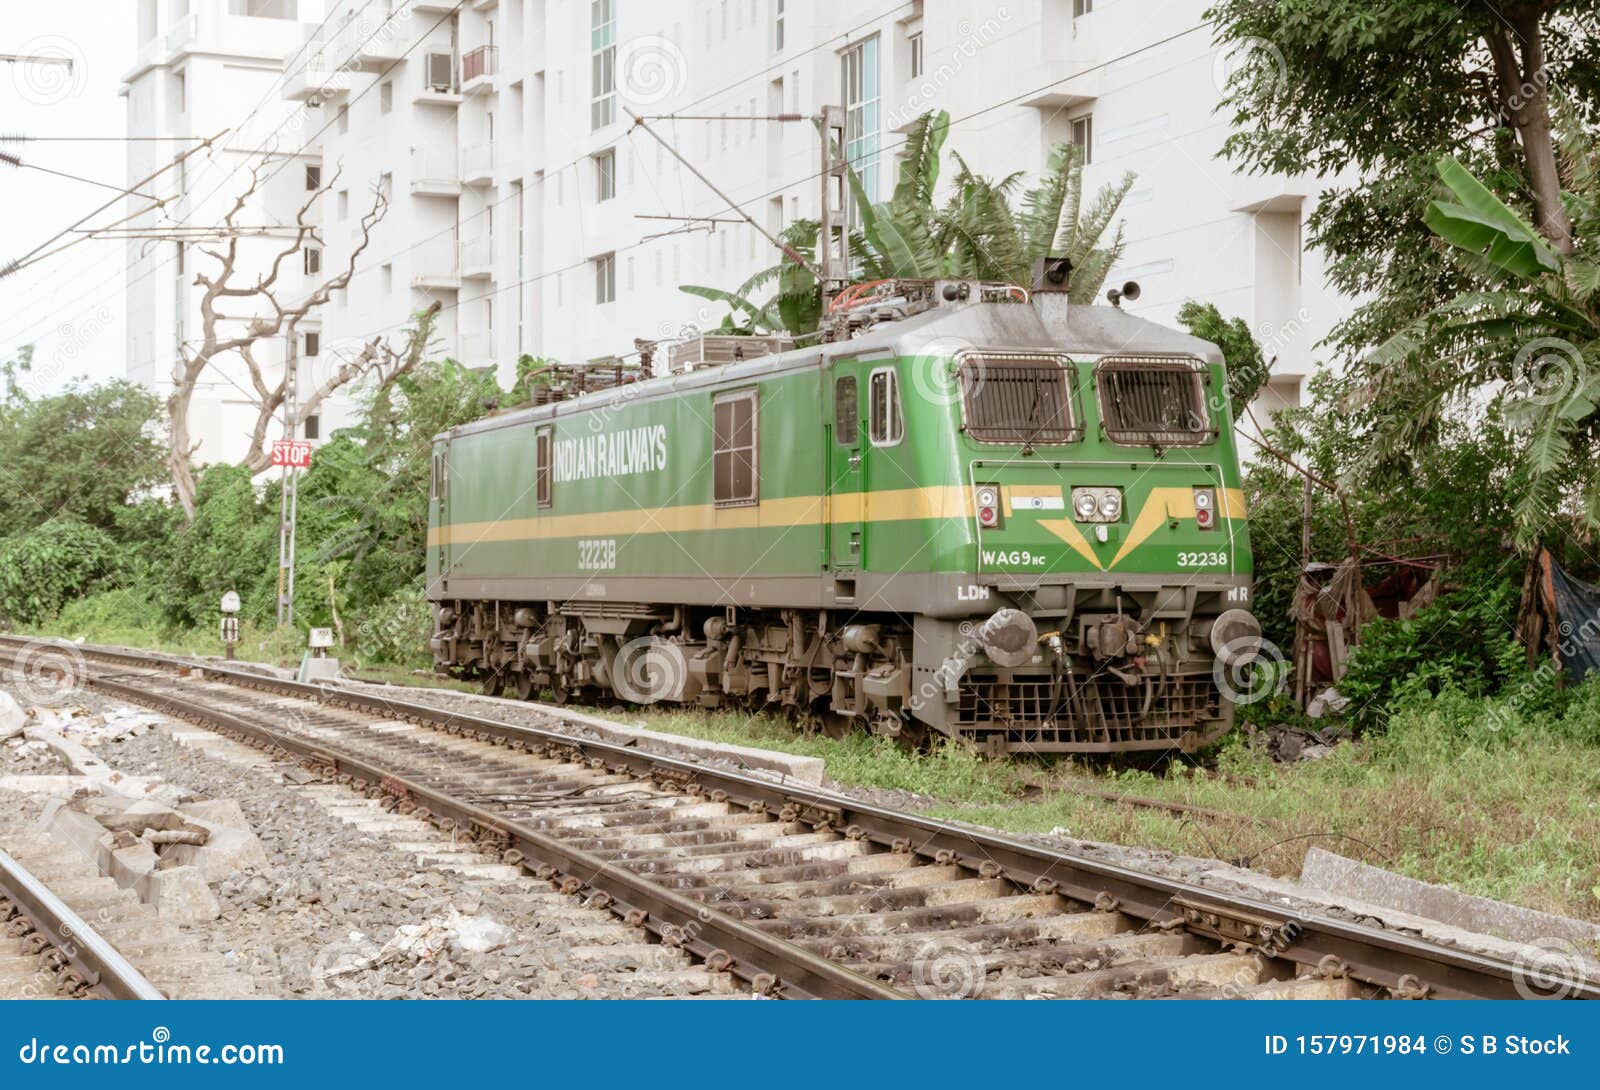 Howrah Kolkata August 19 A High Power Electric Wag 9 Locomotive Loco Engine Wagon On Rail Tracks Of Indian Railway Editorial Stock Image Image Of Freight Journey